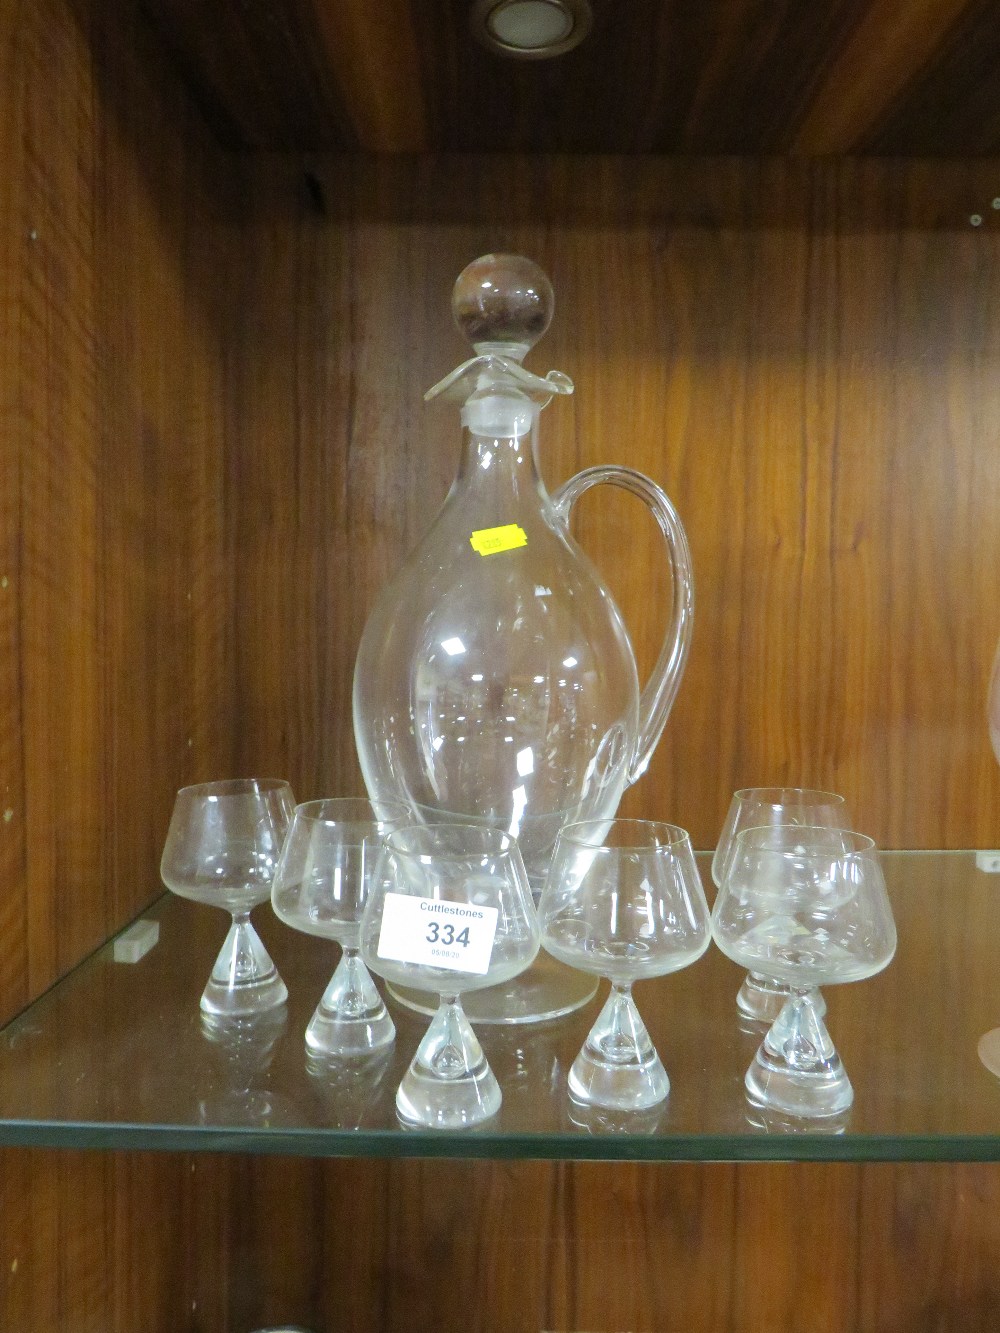 SCHOTT ZSYIESEL GERMAN DECANTER & TWO GLASSES TOGETHER WITH A VICTORIAN GLASS DECANTER & SIX